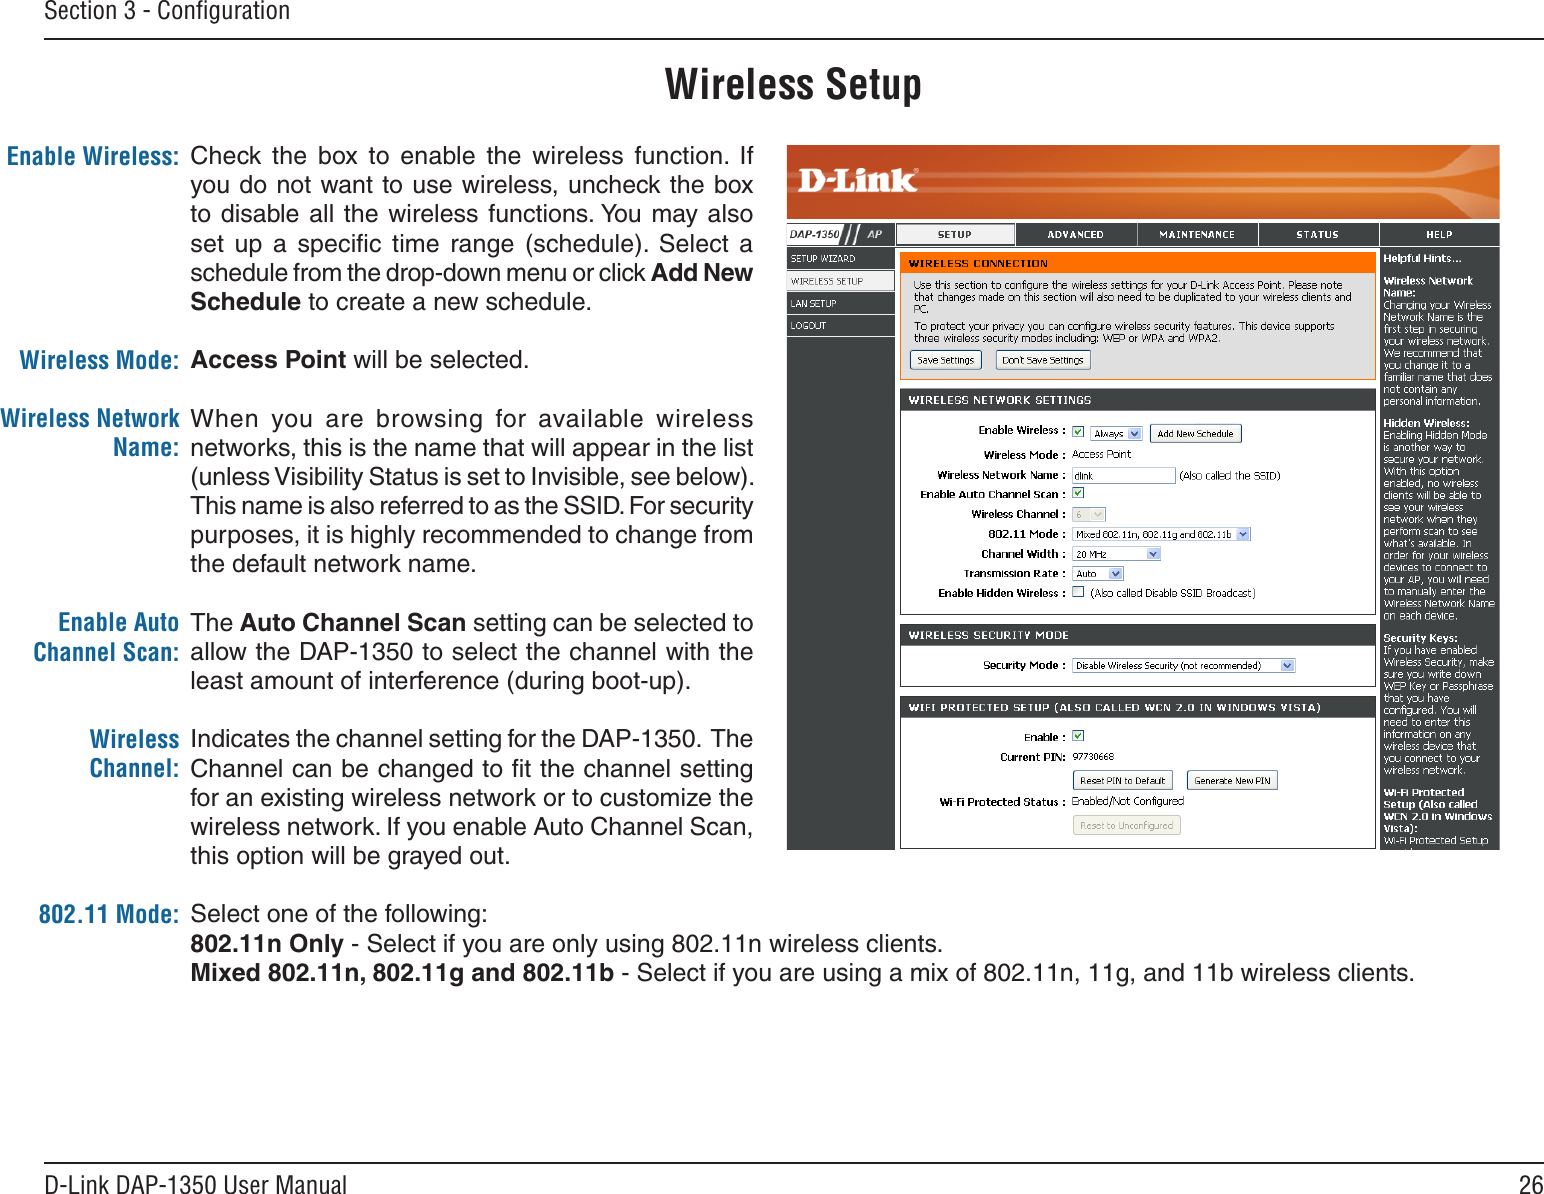 26D-Link DAP-1350 User ManualSection 3 - ConﬁgurationEnable Wireless:Wireless Mode:Wireless Network Name:Enable Auto Channel Scan:Wireless Channel:802.11 Mode:            Check  the  box  to  enable  the  wireless  function.  If you do not want to use wireless, uncheck the box to disable all the  wireless functions. You  may also set  up  a  speciﬁc  time  range  (schedule).  Select  a schedule from the drop-down menu or click Add New Schedule to create a new schedule. Access Point will be selected.When  you  are  browsing  for  available  wireless networks, this is the name that will appear in the list (unless Visibility Status is set to Invisible, see below). This name is also referred to as the SSID. For security purposes, it is highly recommended to change from the default network name.The Auto Channel Scan setting can be selected to allow the DAP-1350 to select the channel with the least amount of interference (during boot-up). Indicates the channel setting for the DAP-1350.  The Channel can be changed to ﬁt the channel setting for an existing wireless network or to customize the wireless network. If you enable Auto Channel Scan, this option will be grayed out.Select one of the following:802.11n Only - Select if you are only using 802.11n wireless clients.Mixed 802.11n, 802.11g and 802.11b - Select if you are using a mix of 802.11n, 11g, and 11b wireless clients.Wireless Setup